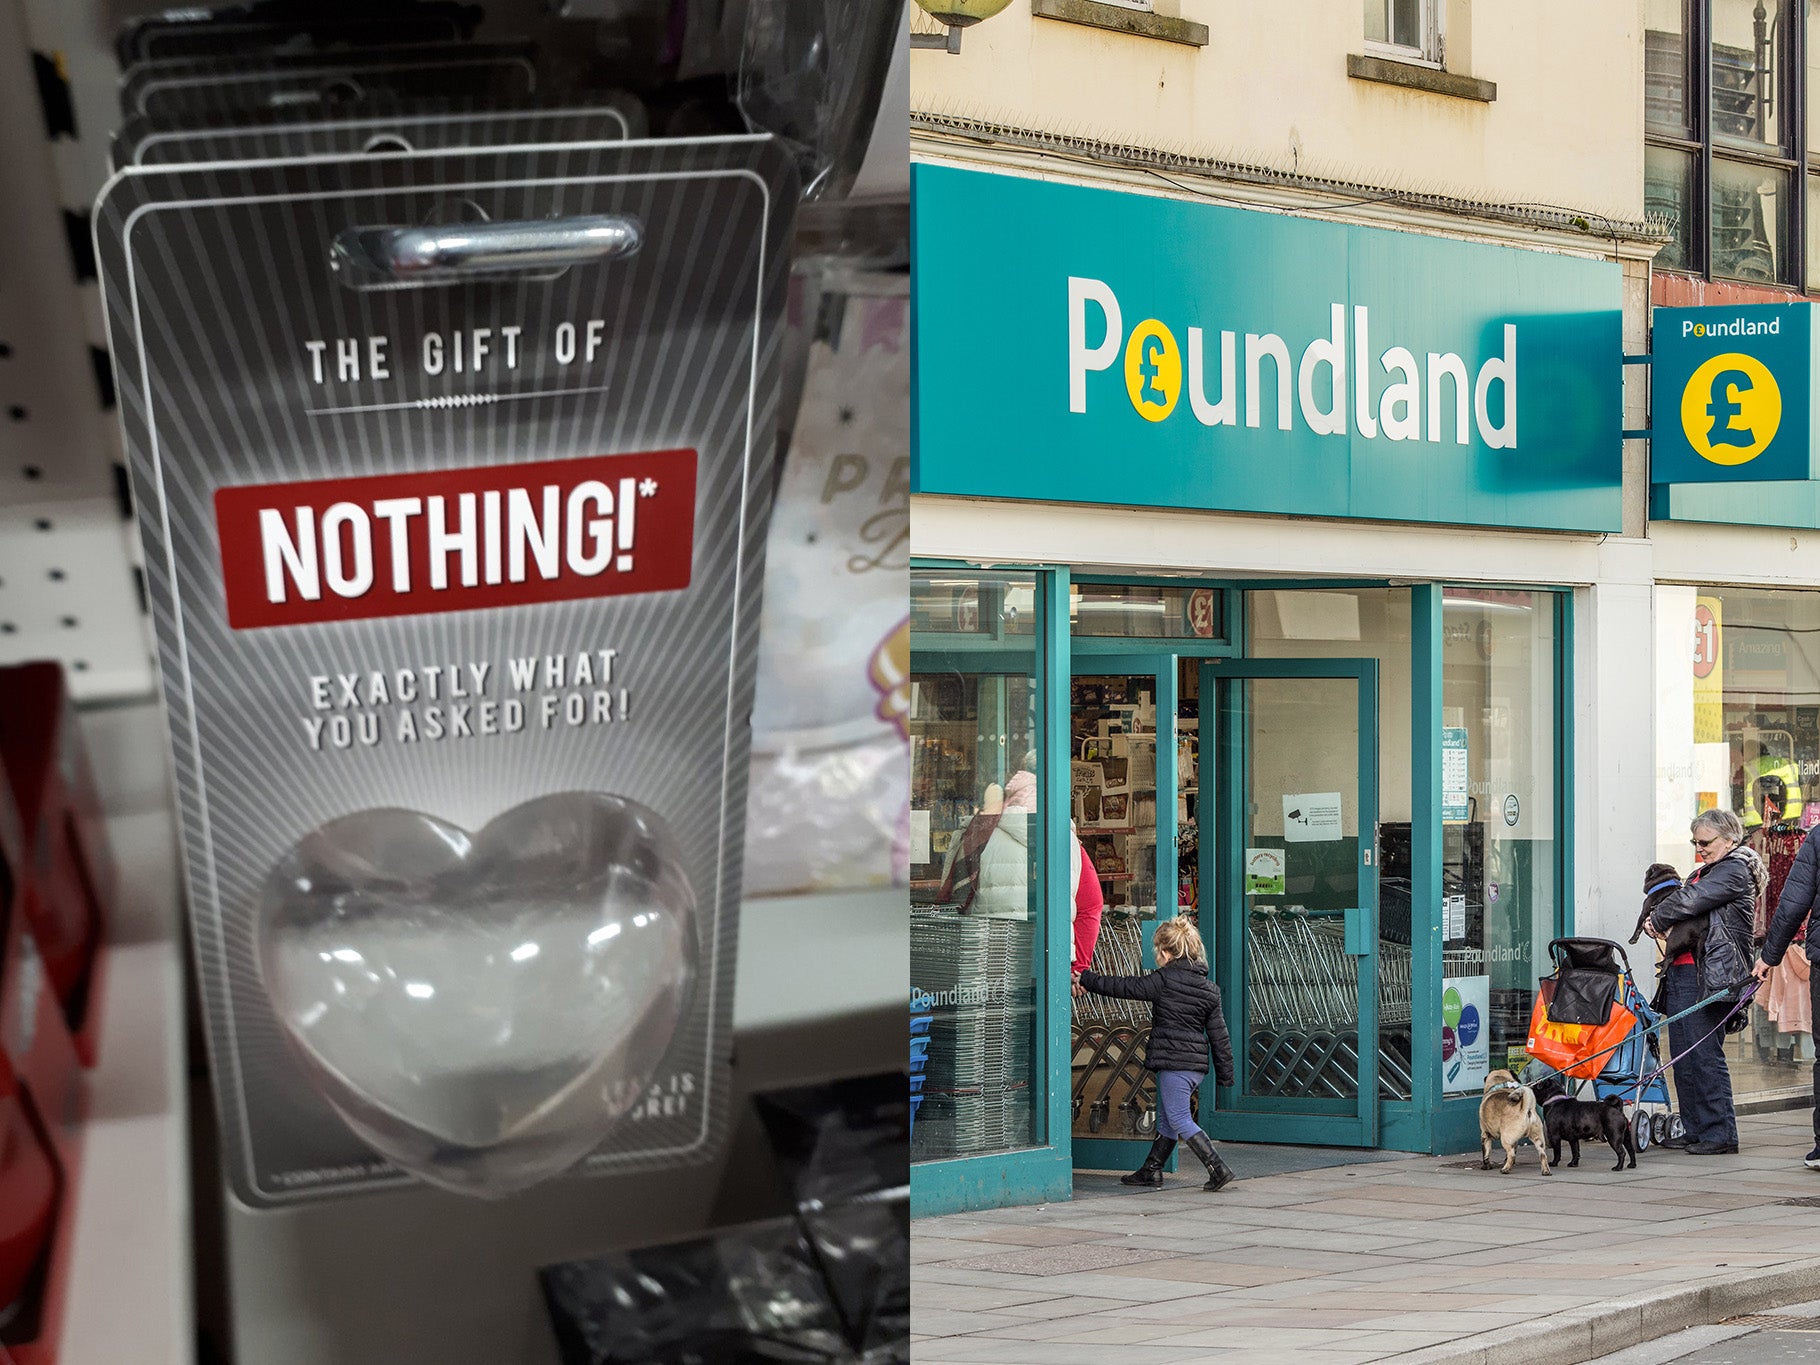 Poundland has defended its plastic product as a ‘bit of fun’ but has not said whether it can be recycled